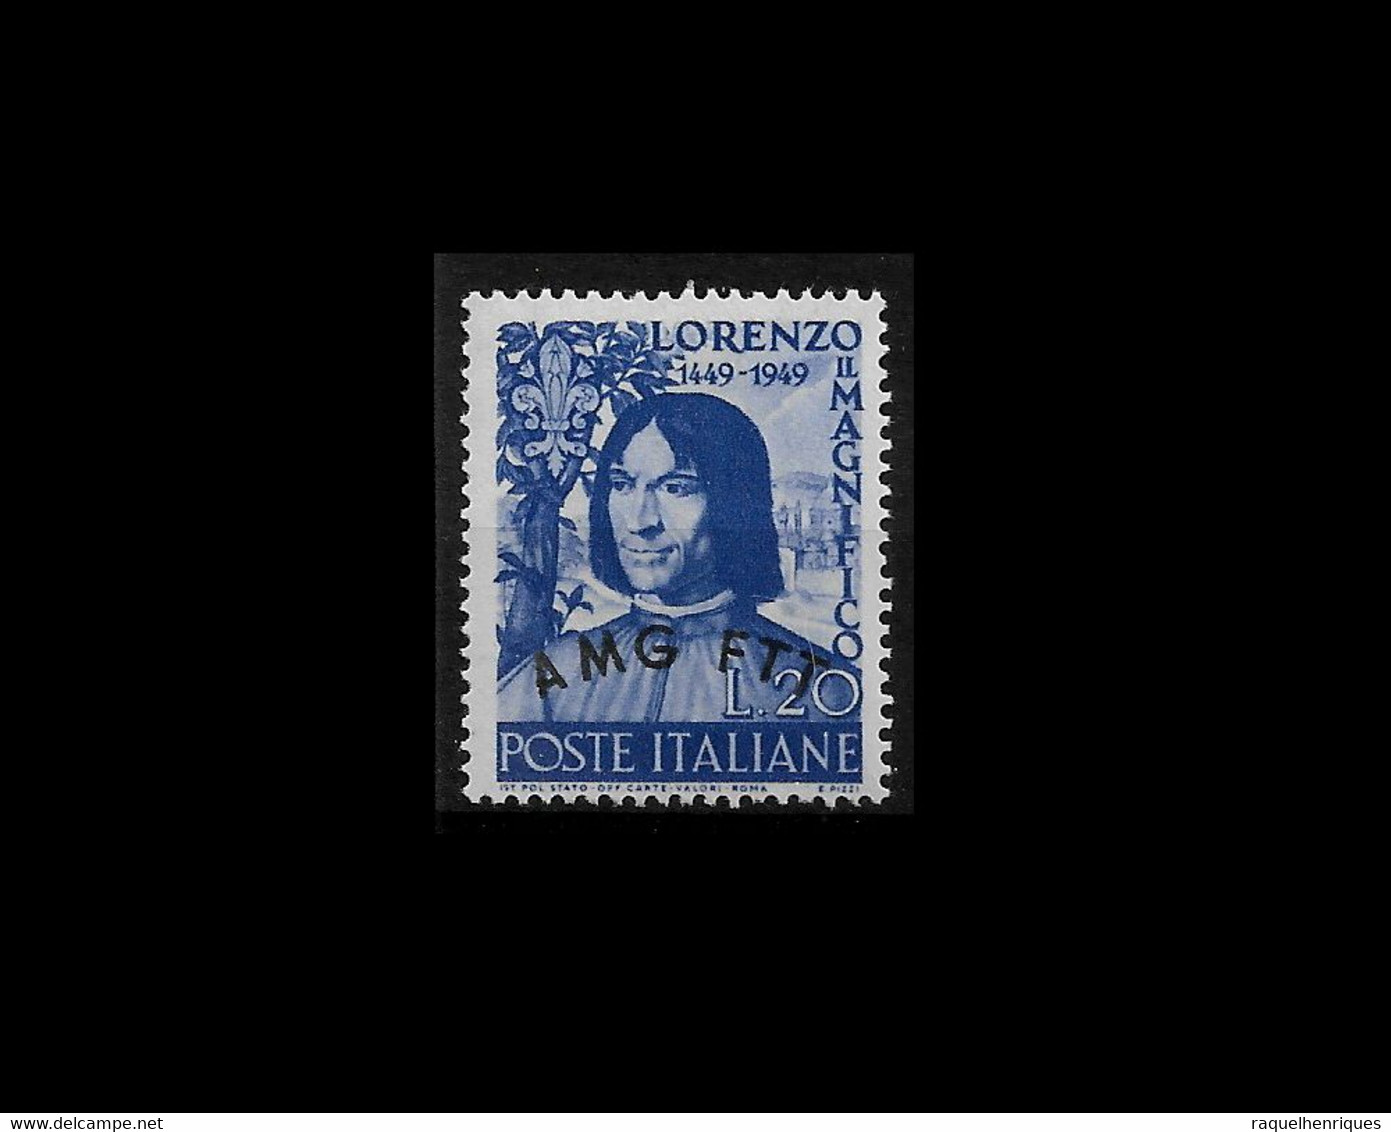 ITALY STAMP - TRIESTE ZONE A - 1949 The 500th An.Birth Of Lorenzo Medici - AMG FTT MH (BA5#58) - Egée (Admin. Autonome)